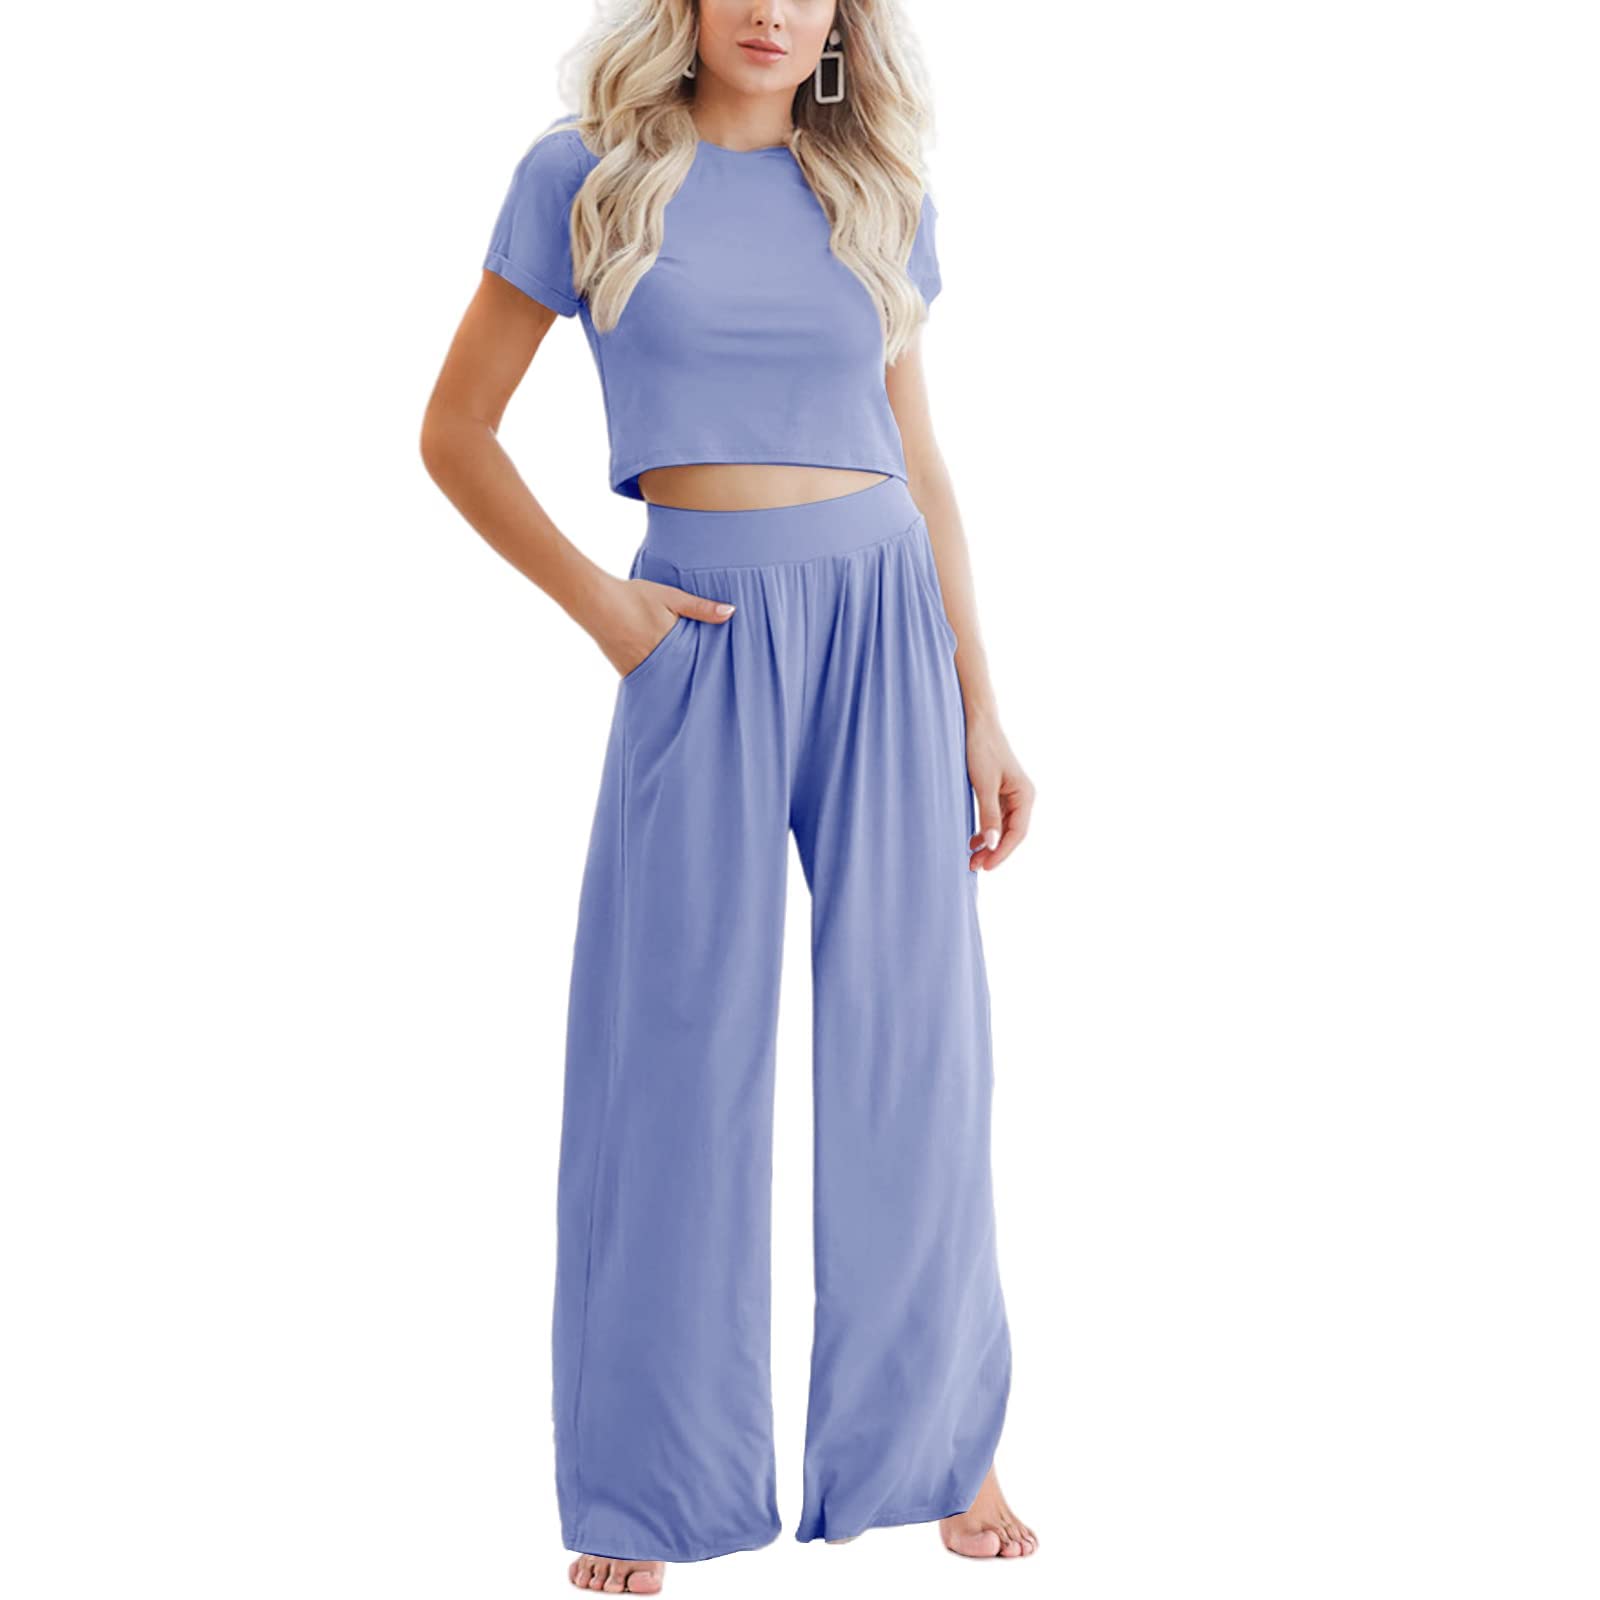 2 Piece Summer Outfits Women, Women's Casual Summer 2 Piece Outfits Short Sleeve Crop Top and Pocketed Wide Leg Pants, Suitable for Daily Wear, Party, Date, Club, Work, Beach (Blue,M)